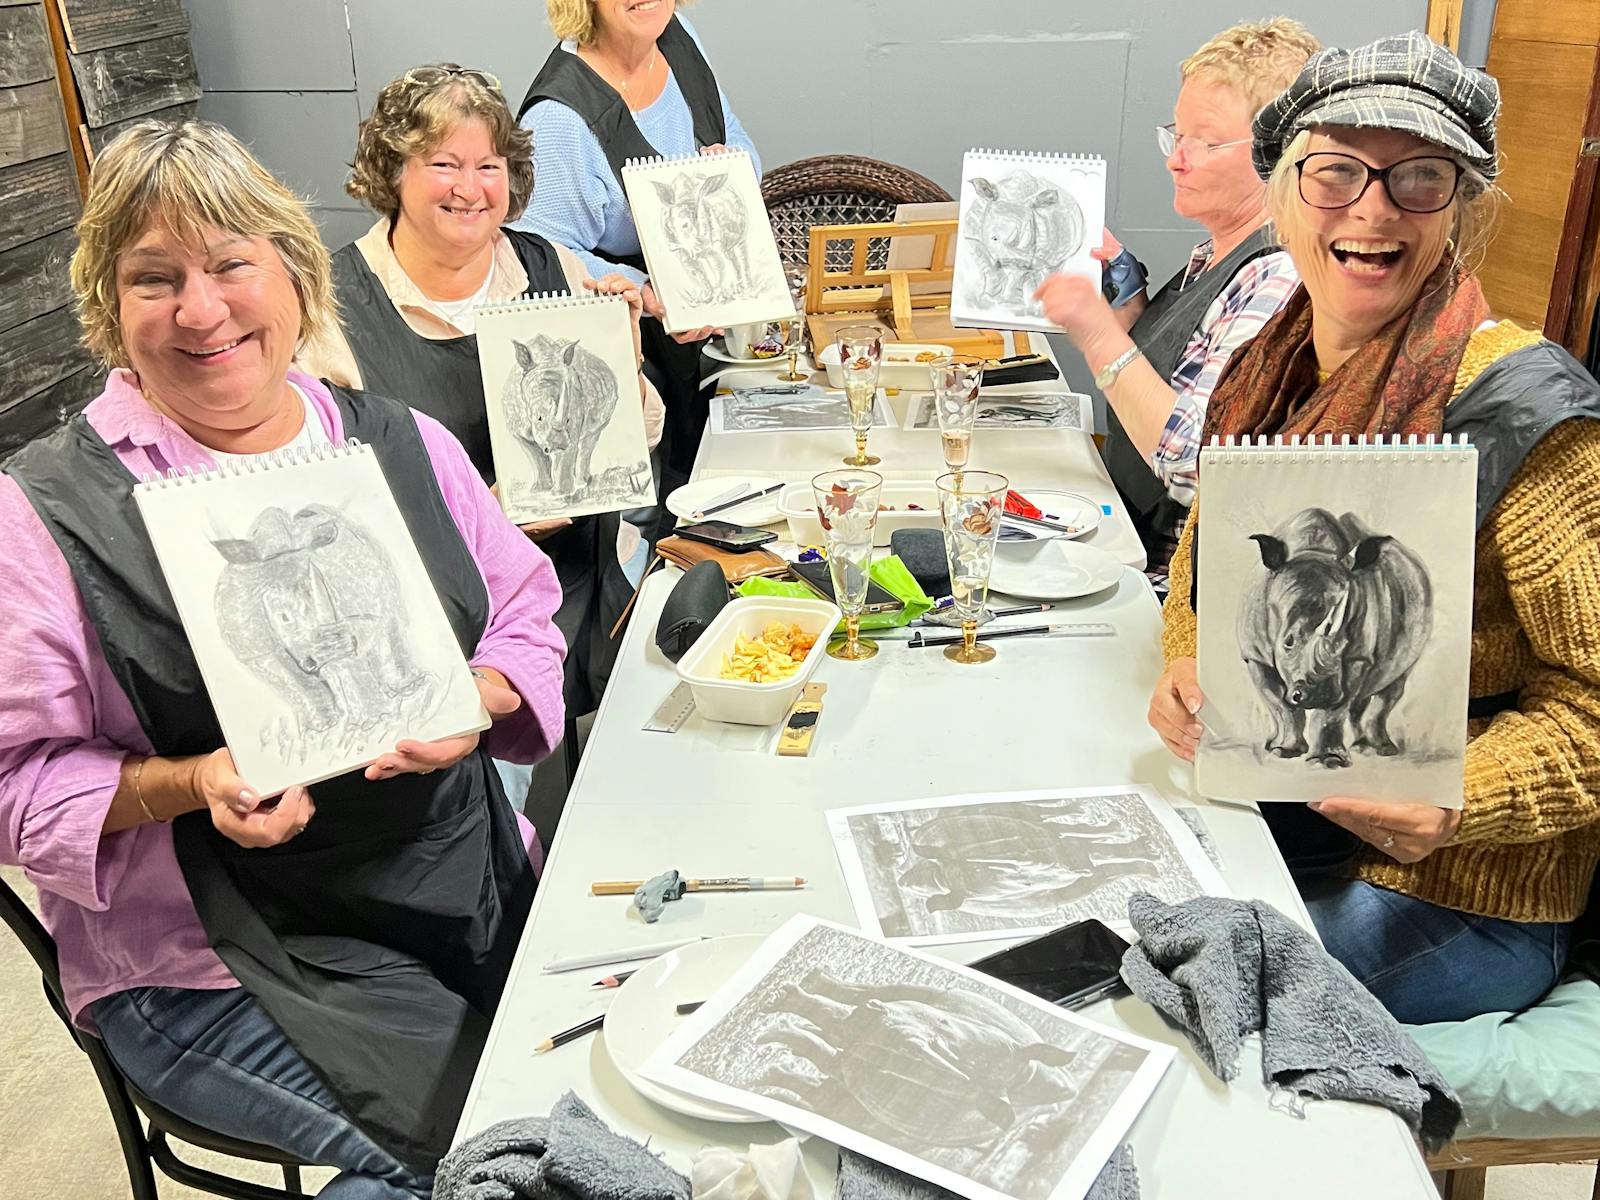 Locals and visitors enjoying one of our many workshops at Creations on the Bay.